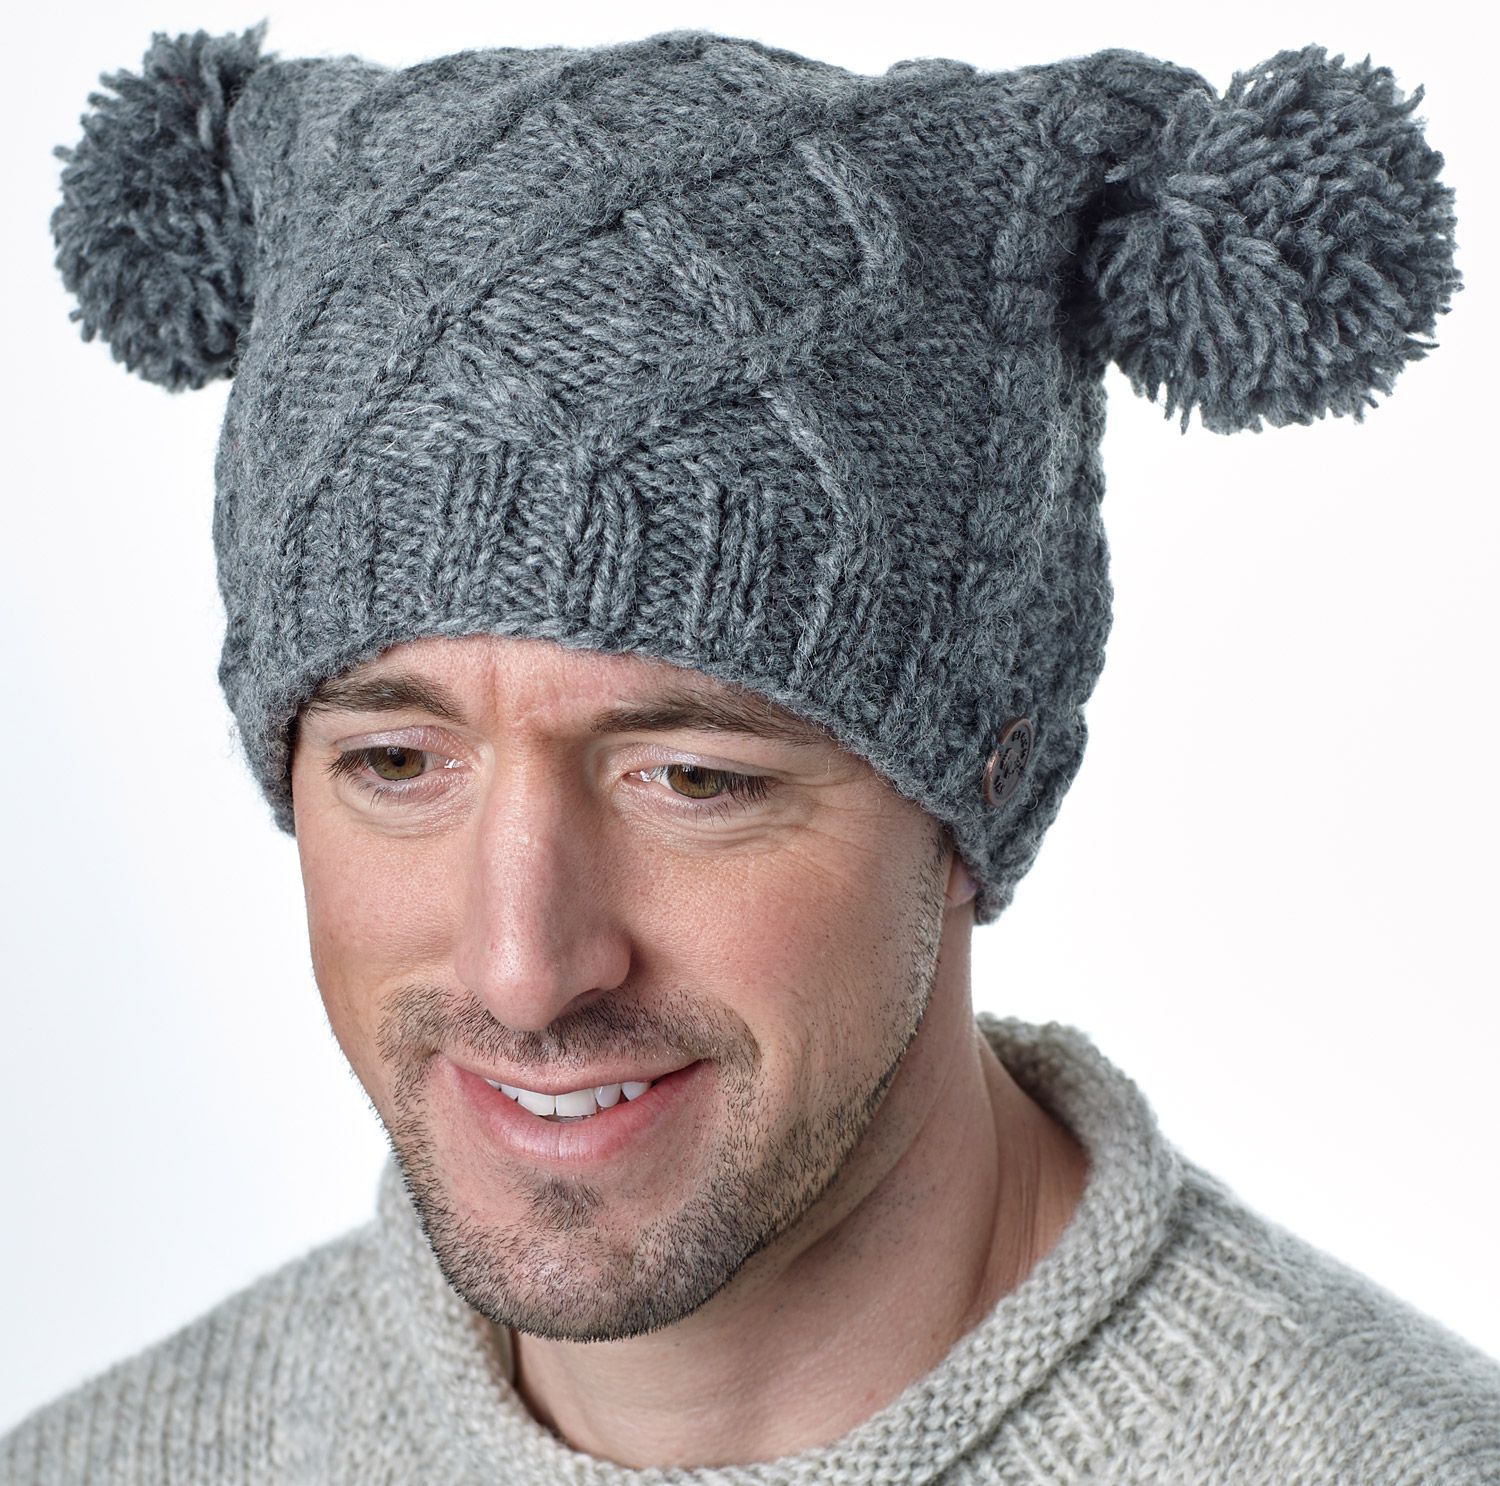 Pure - square cable - pom pom hat - Mid Grey Black Yak